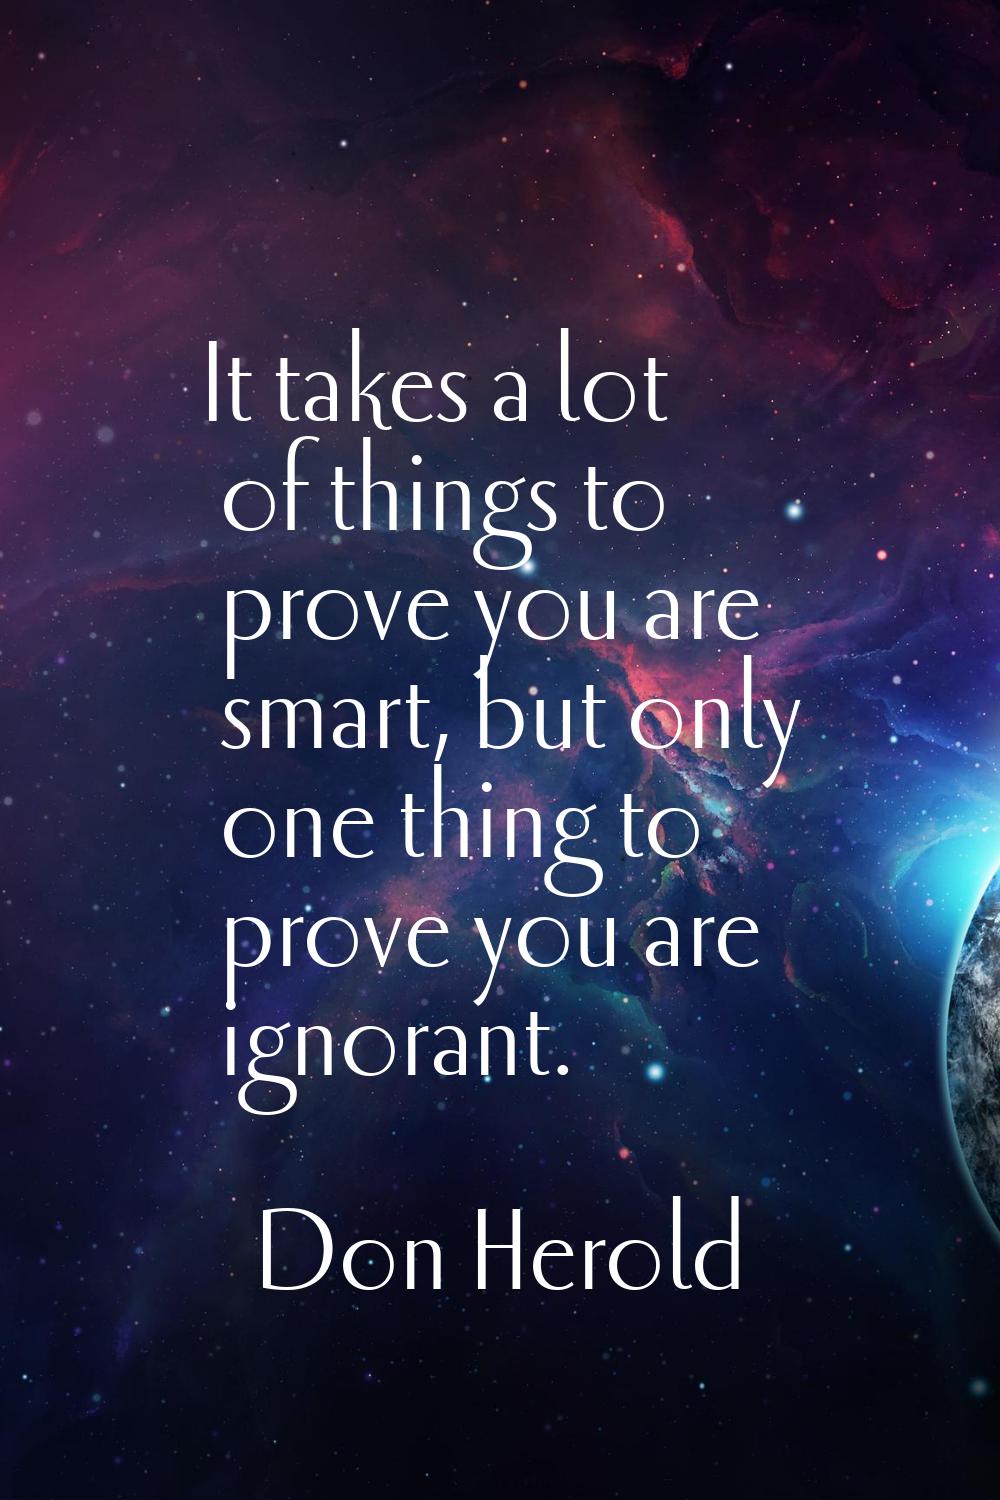 It takes a lot of things to prove you are smart, but only one thing to prove you are ignorant.